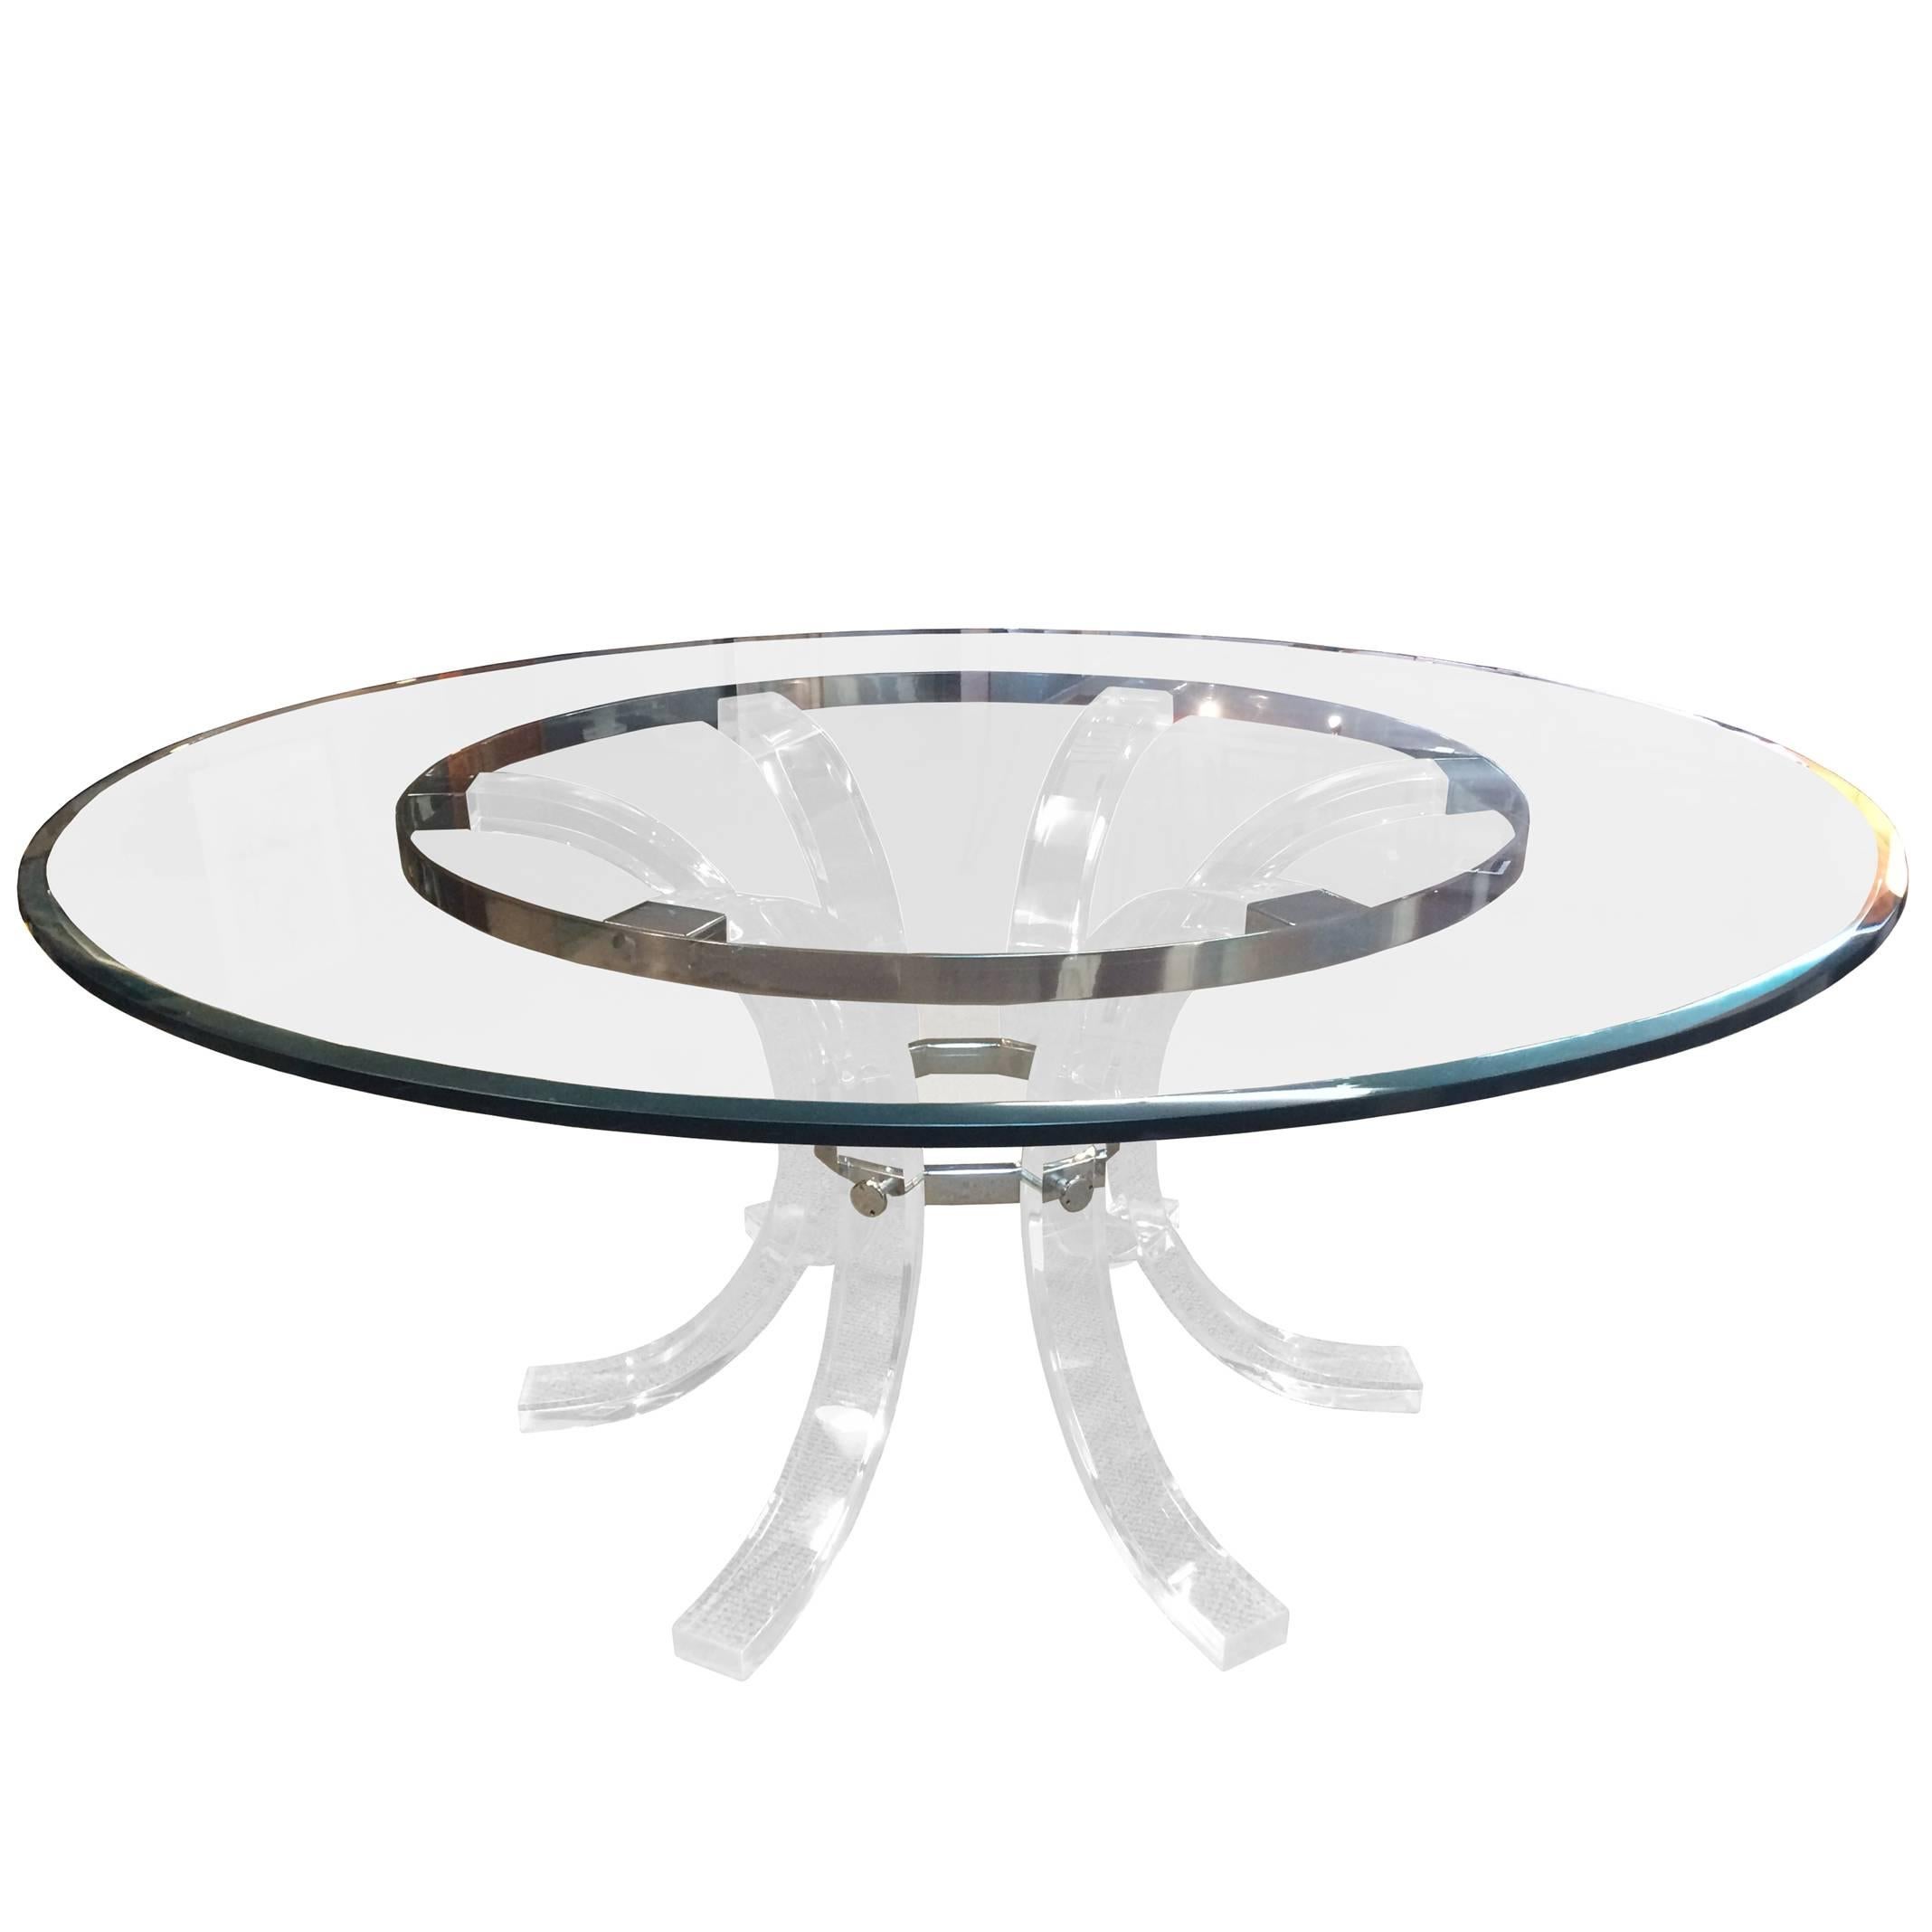 Charles Hollis Jones "Arched" Dining Table in Lucite & Chrome, Seats Eight